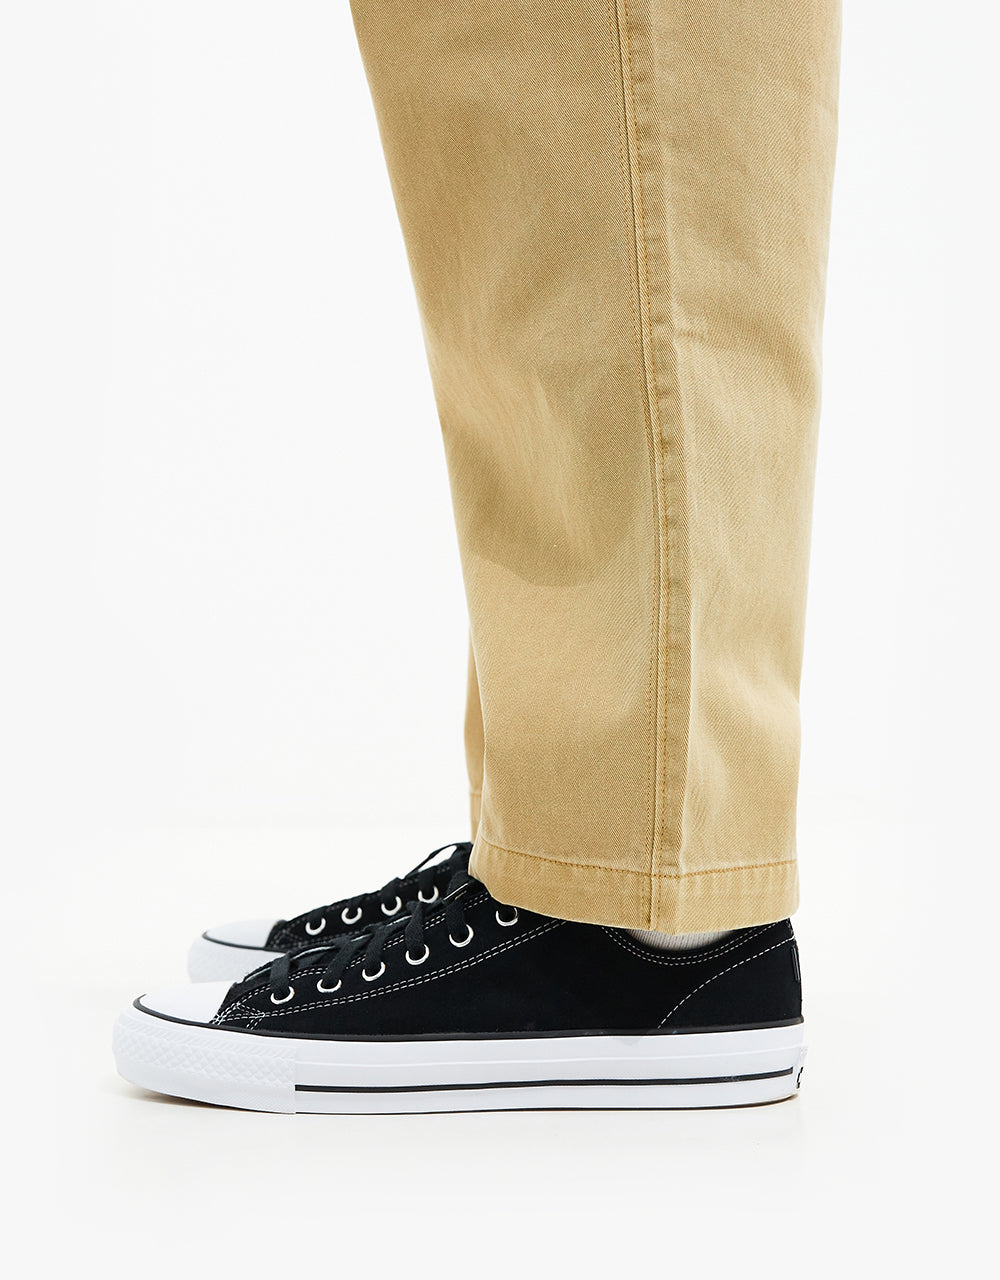 Converse Recycled Canvas Cloud Wash Trail Pant - Nomad Khaki